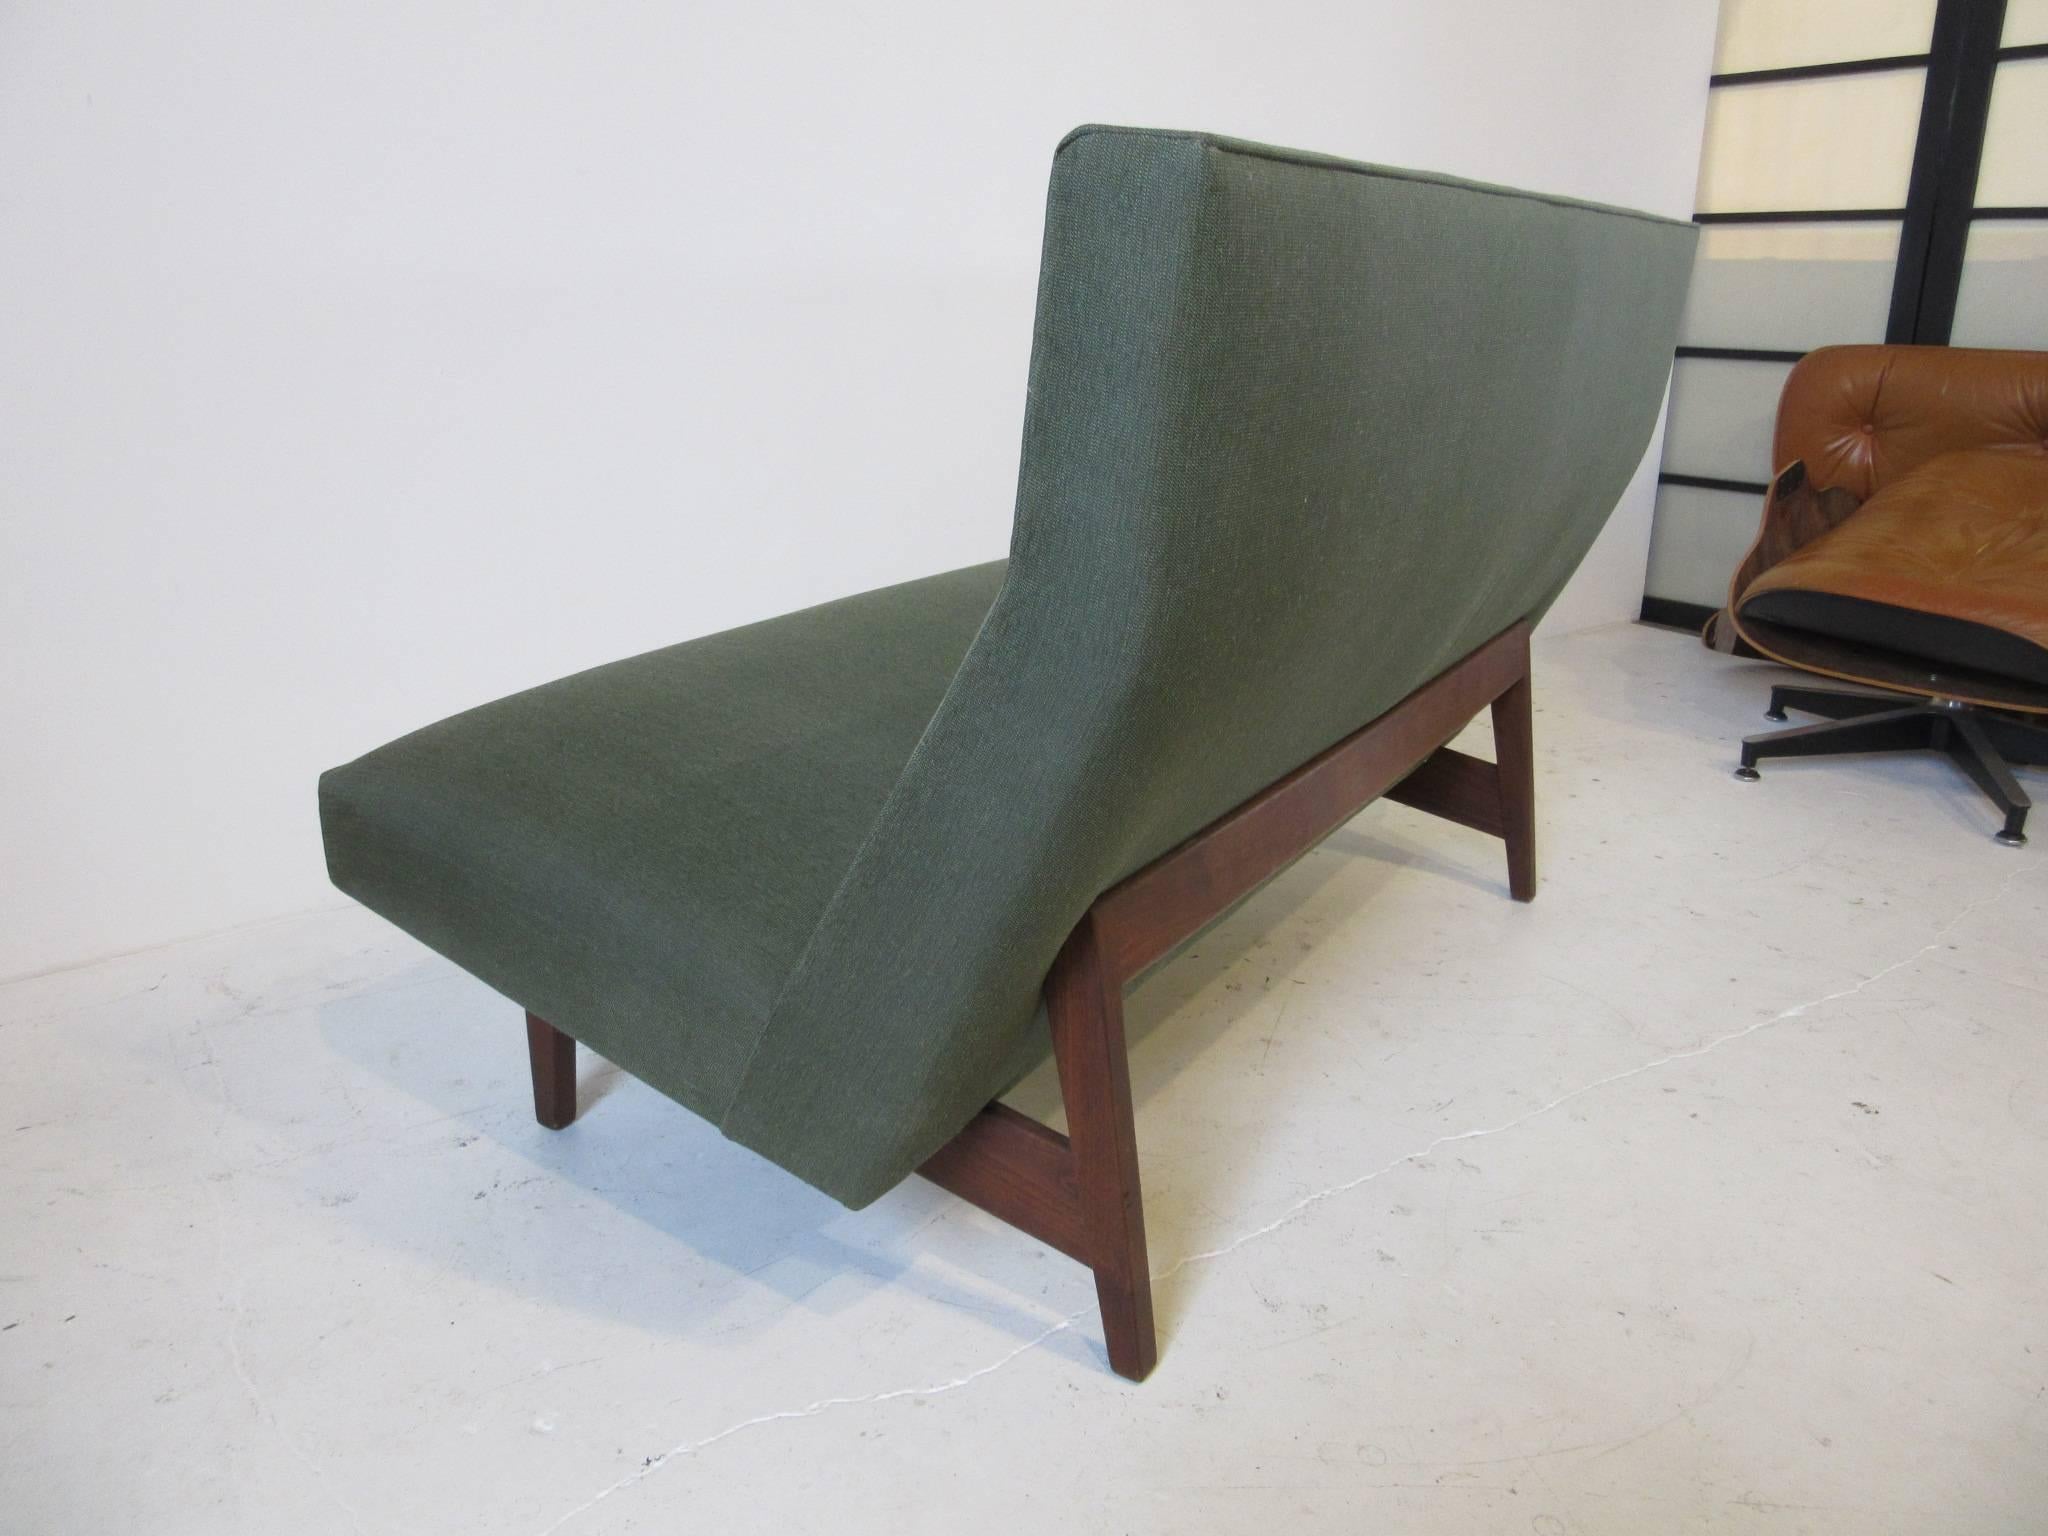 A Danish styled settee with walnut frame exposed in the rear and angled seat back with buttons upholstered in a tight moss green contract fabric. Manufactured by the Jens Risom Design company.